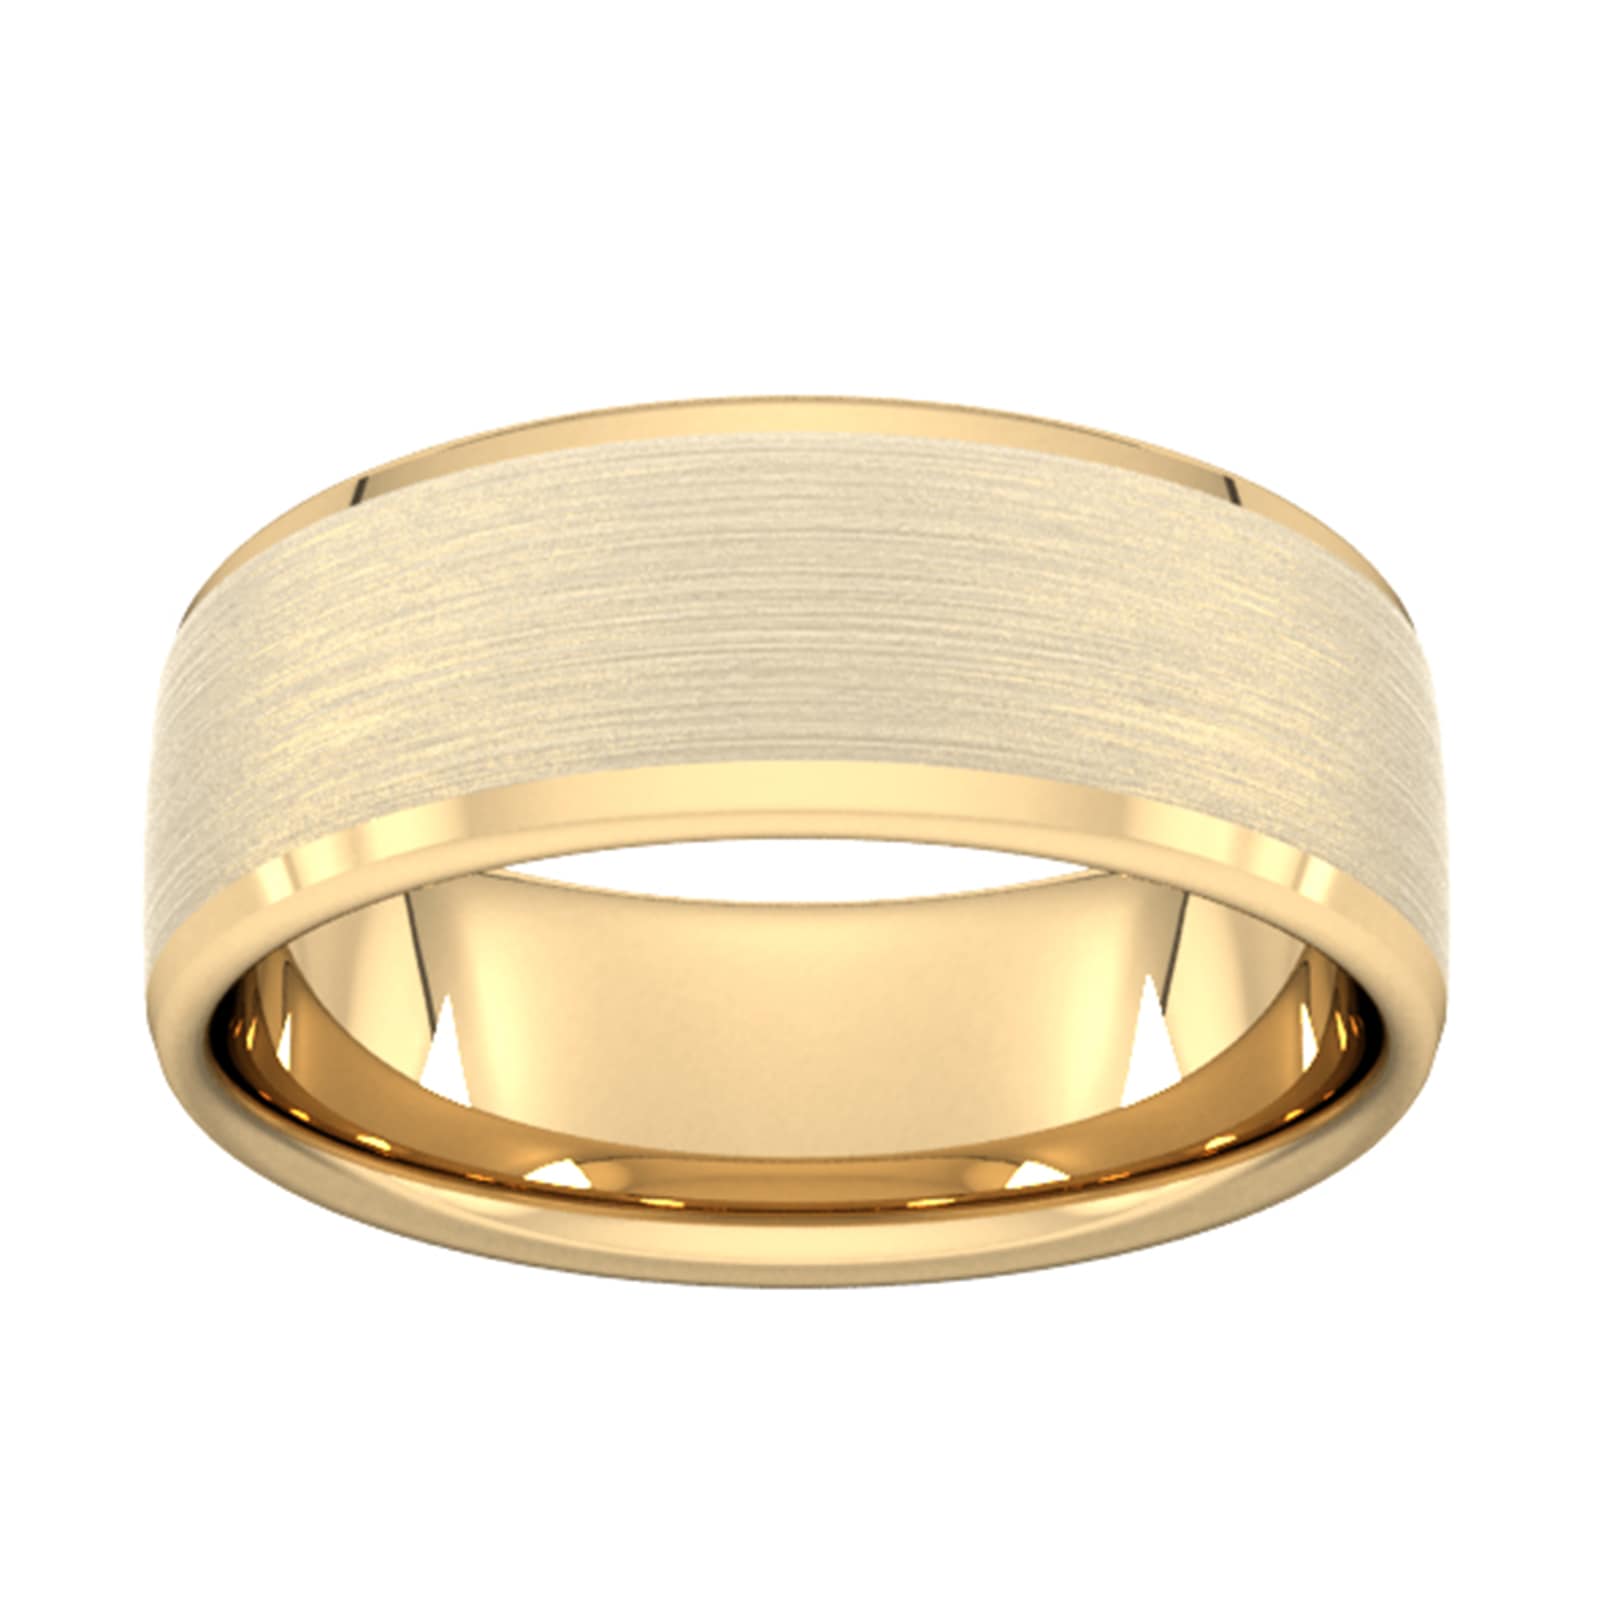 8mm Slight Court Extra Heavy Polished Chamfered Edges With Matt Centre Wedding Ring In 18 Carat Yellow Gold - Ring Size Q